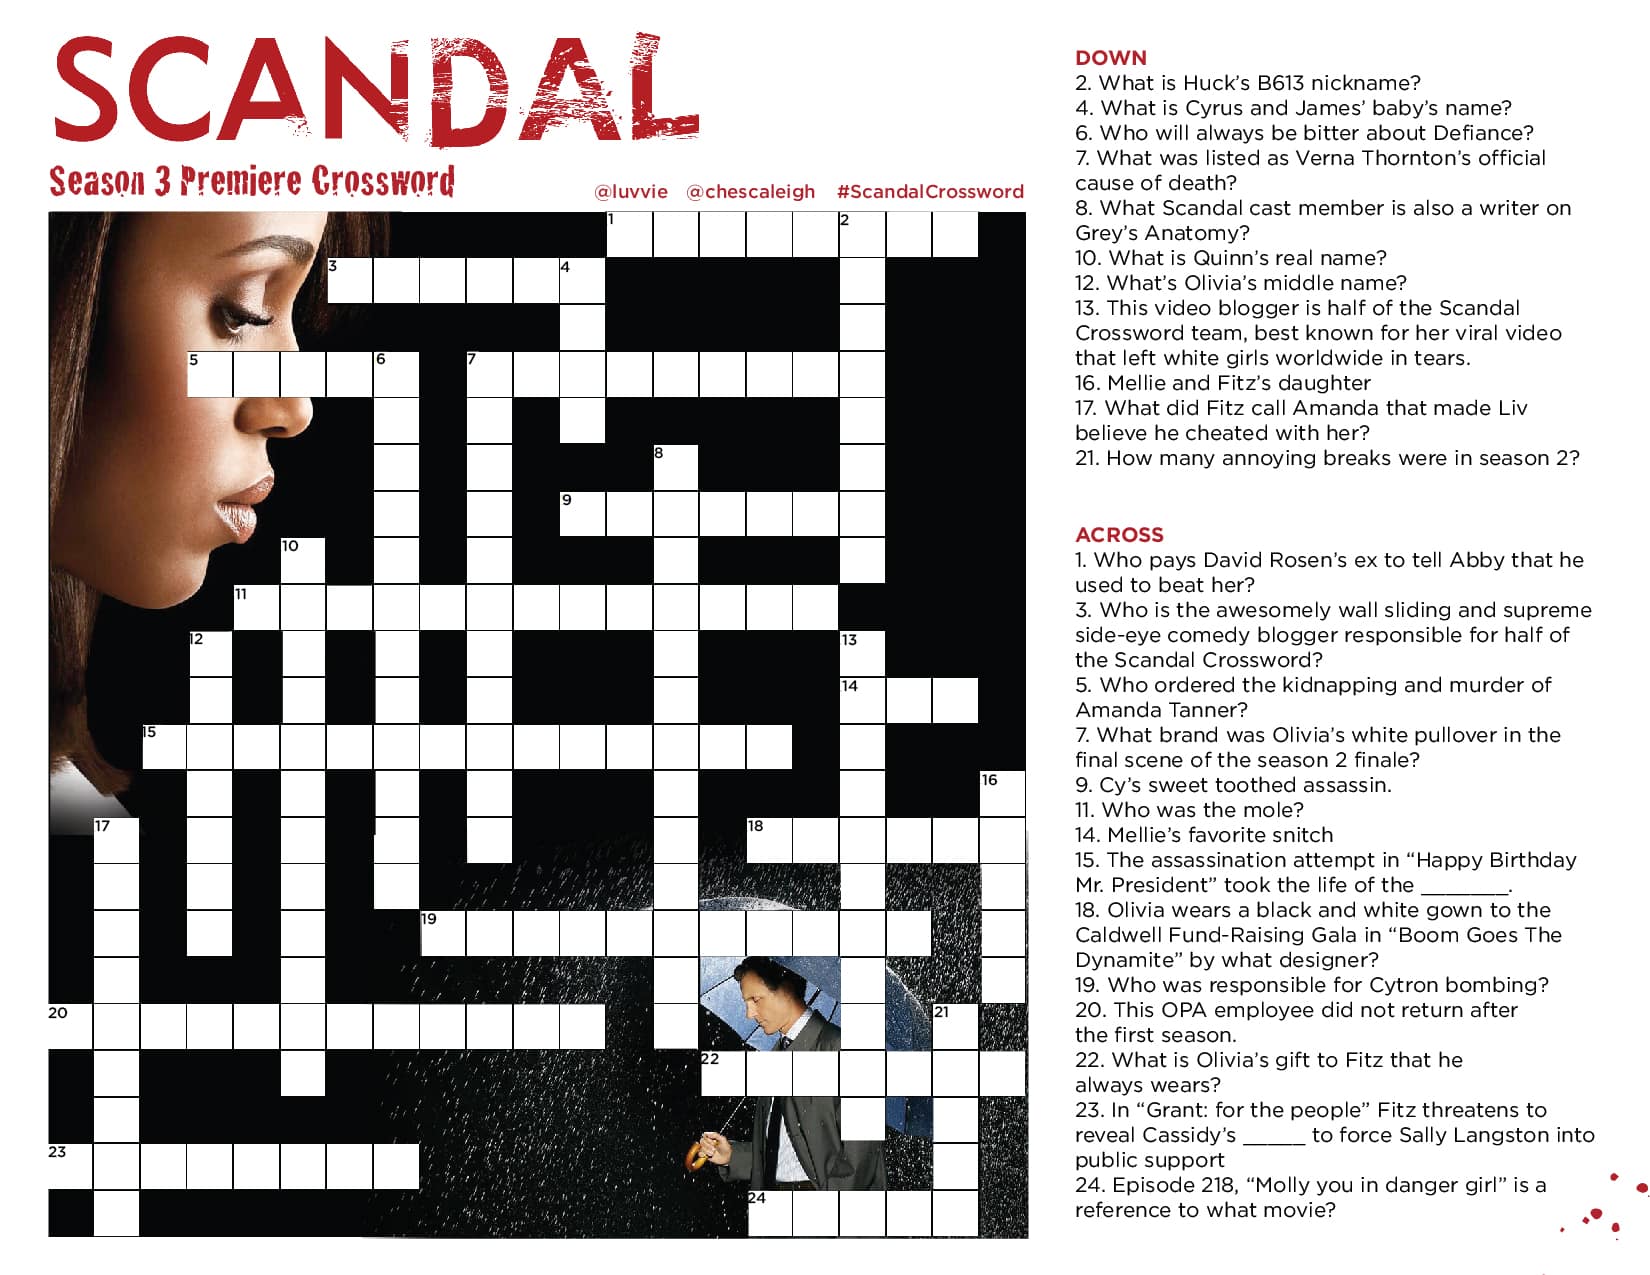 Play the Scandal Crossword Game with Me and Chescaleigh!